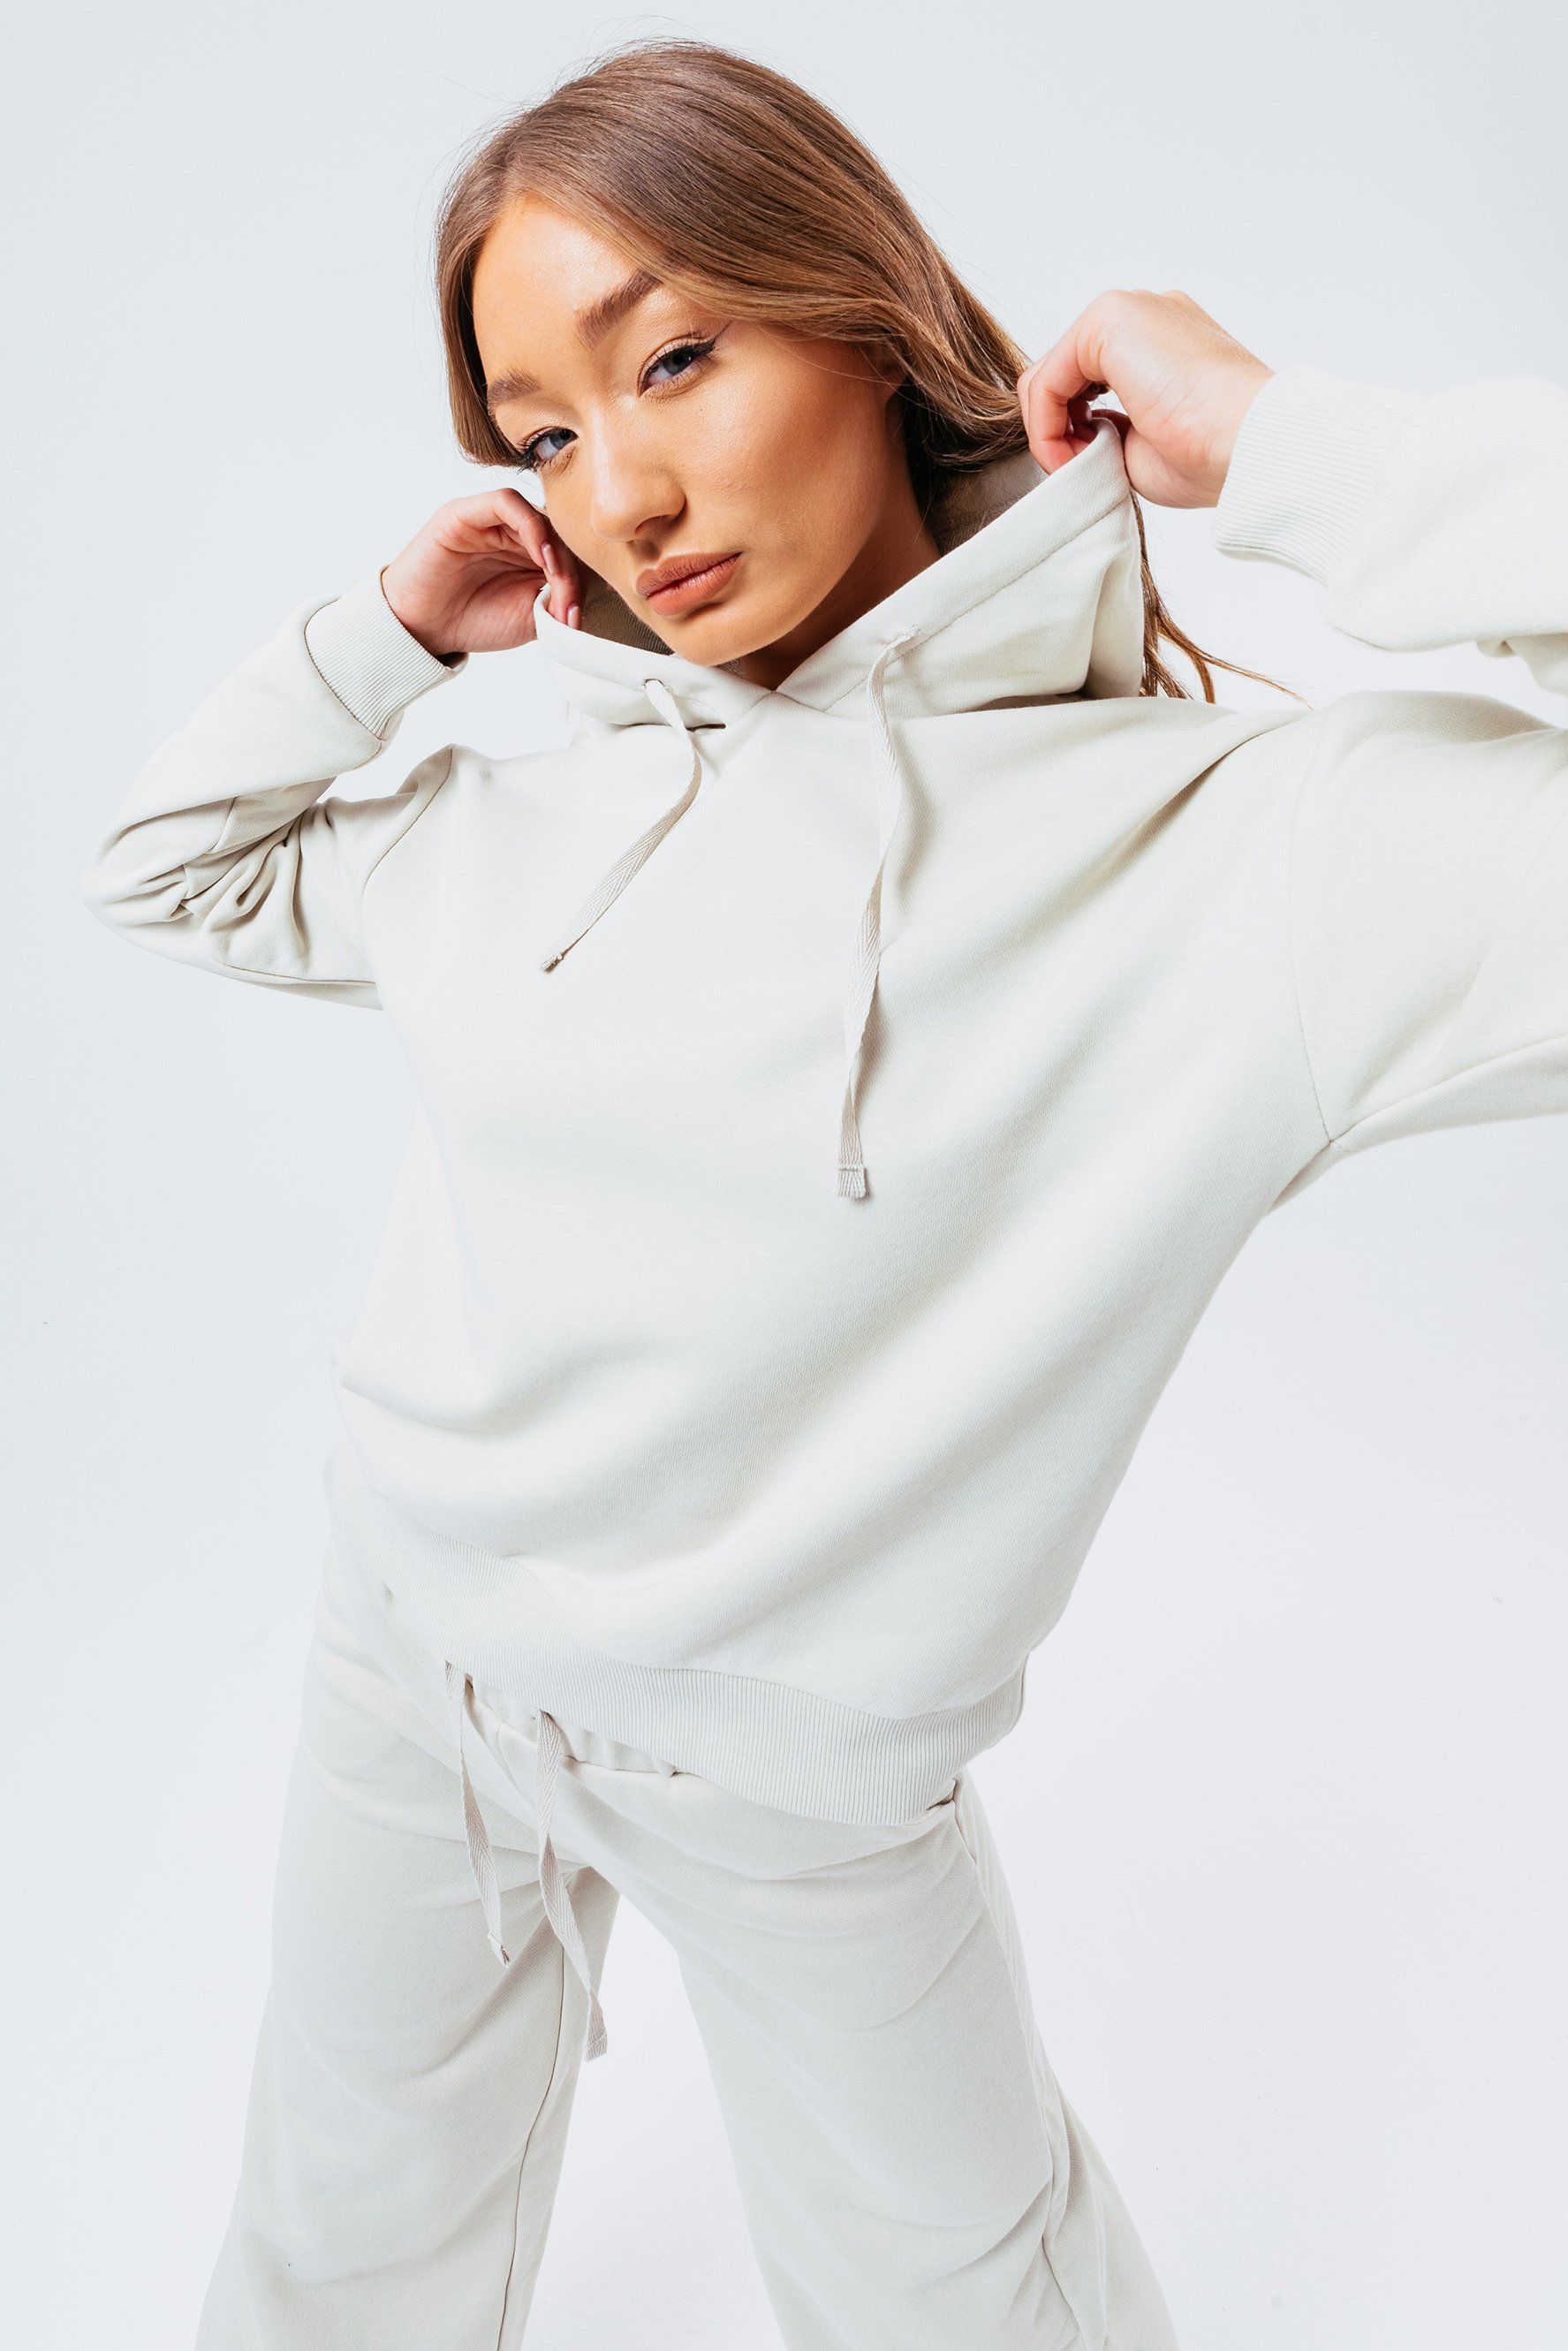 The HYPE. Nude Sweat L/S T-Shirt and Flared Joggers Women's Loungewear Set if your new go-to everyday essential. Both garments boast a 80% Cotton and 20% Polyester fabric base for the ultimate comfort and breathable room. The top boasts our standard Women's long-sleeved tee with drawstring pullers, fixed hood and fitted cuffs. The flared trousers highlight an elasticated waistband, drawstring pullers with a flared long leg. Wear together to complete the set or stand alone paired with seasonal favourites. Machine washable.